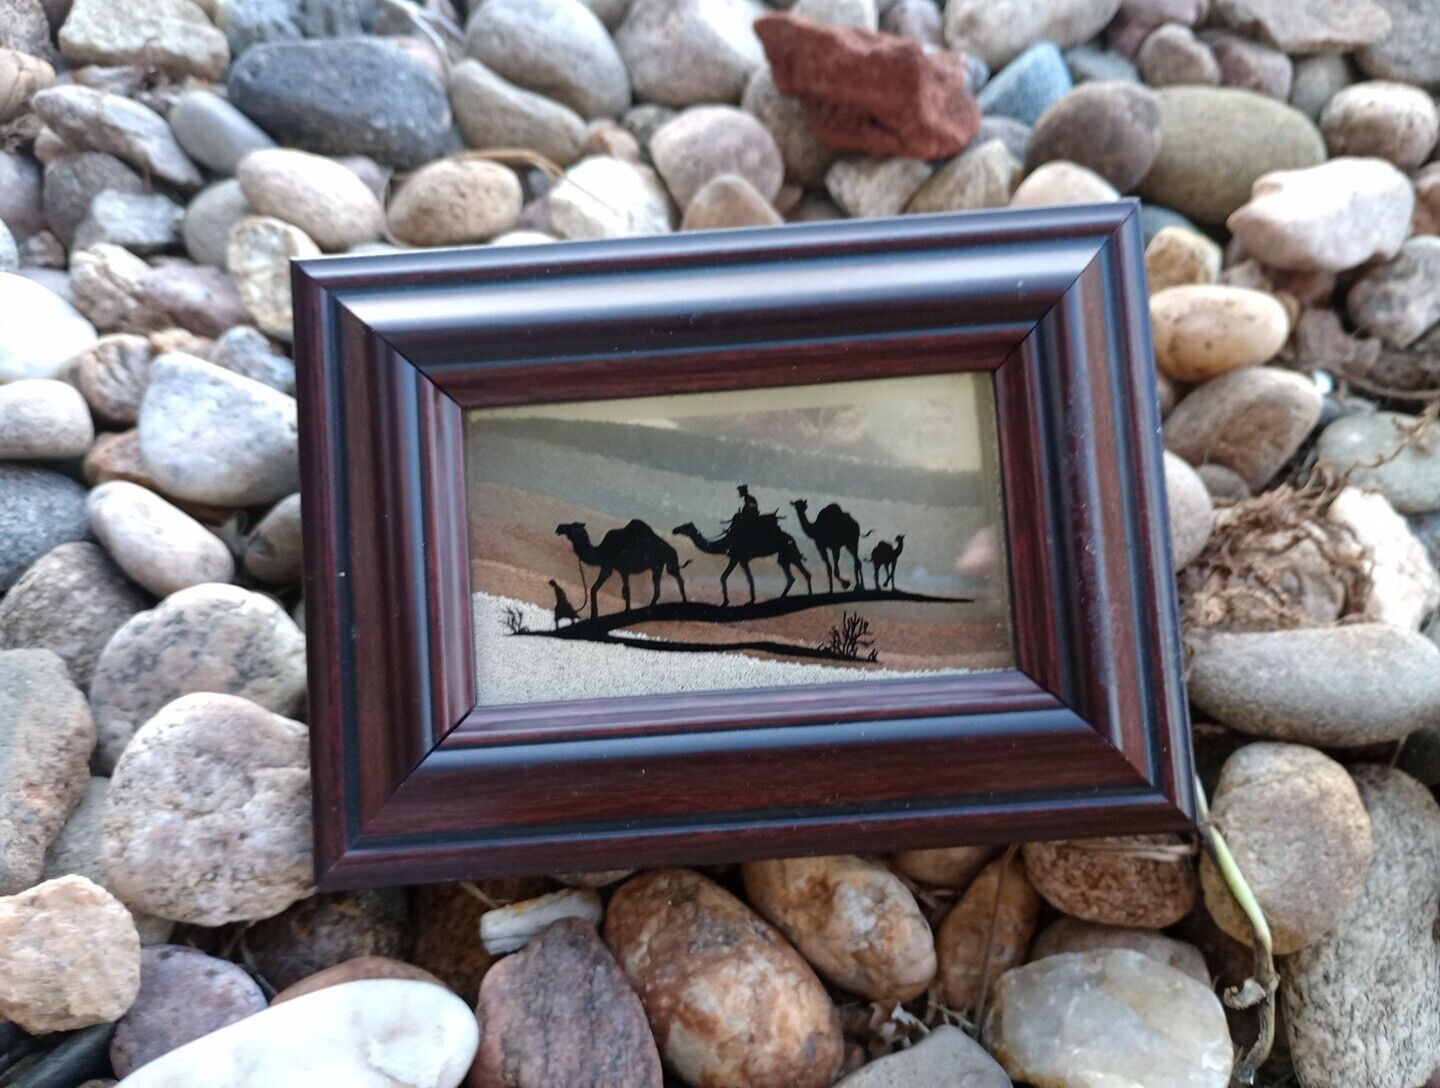 7 Emirates Of UAE Seven Natural Color Of Sands Camel Picture 5.5 In X 4 In 